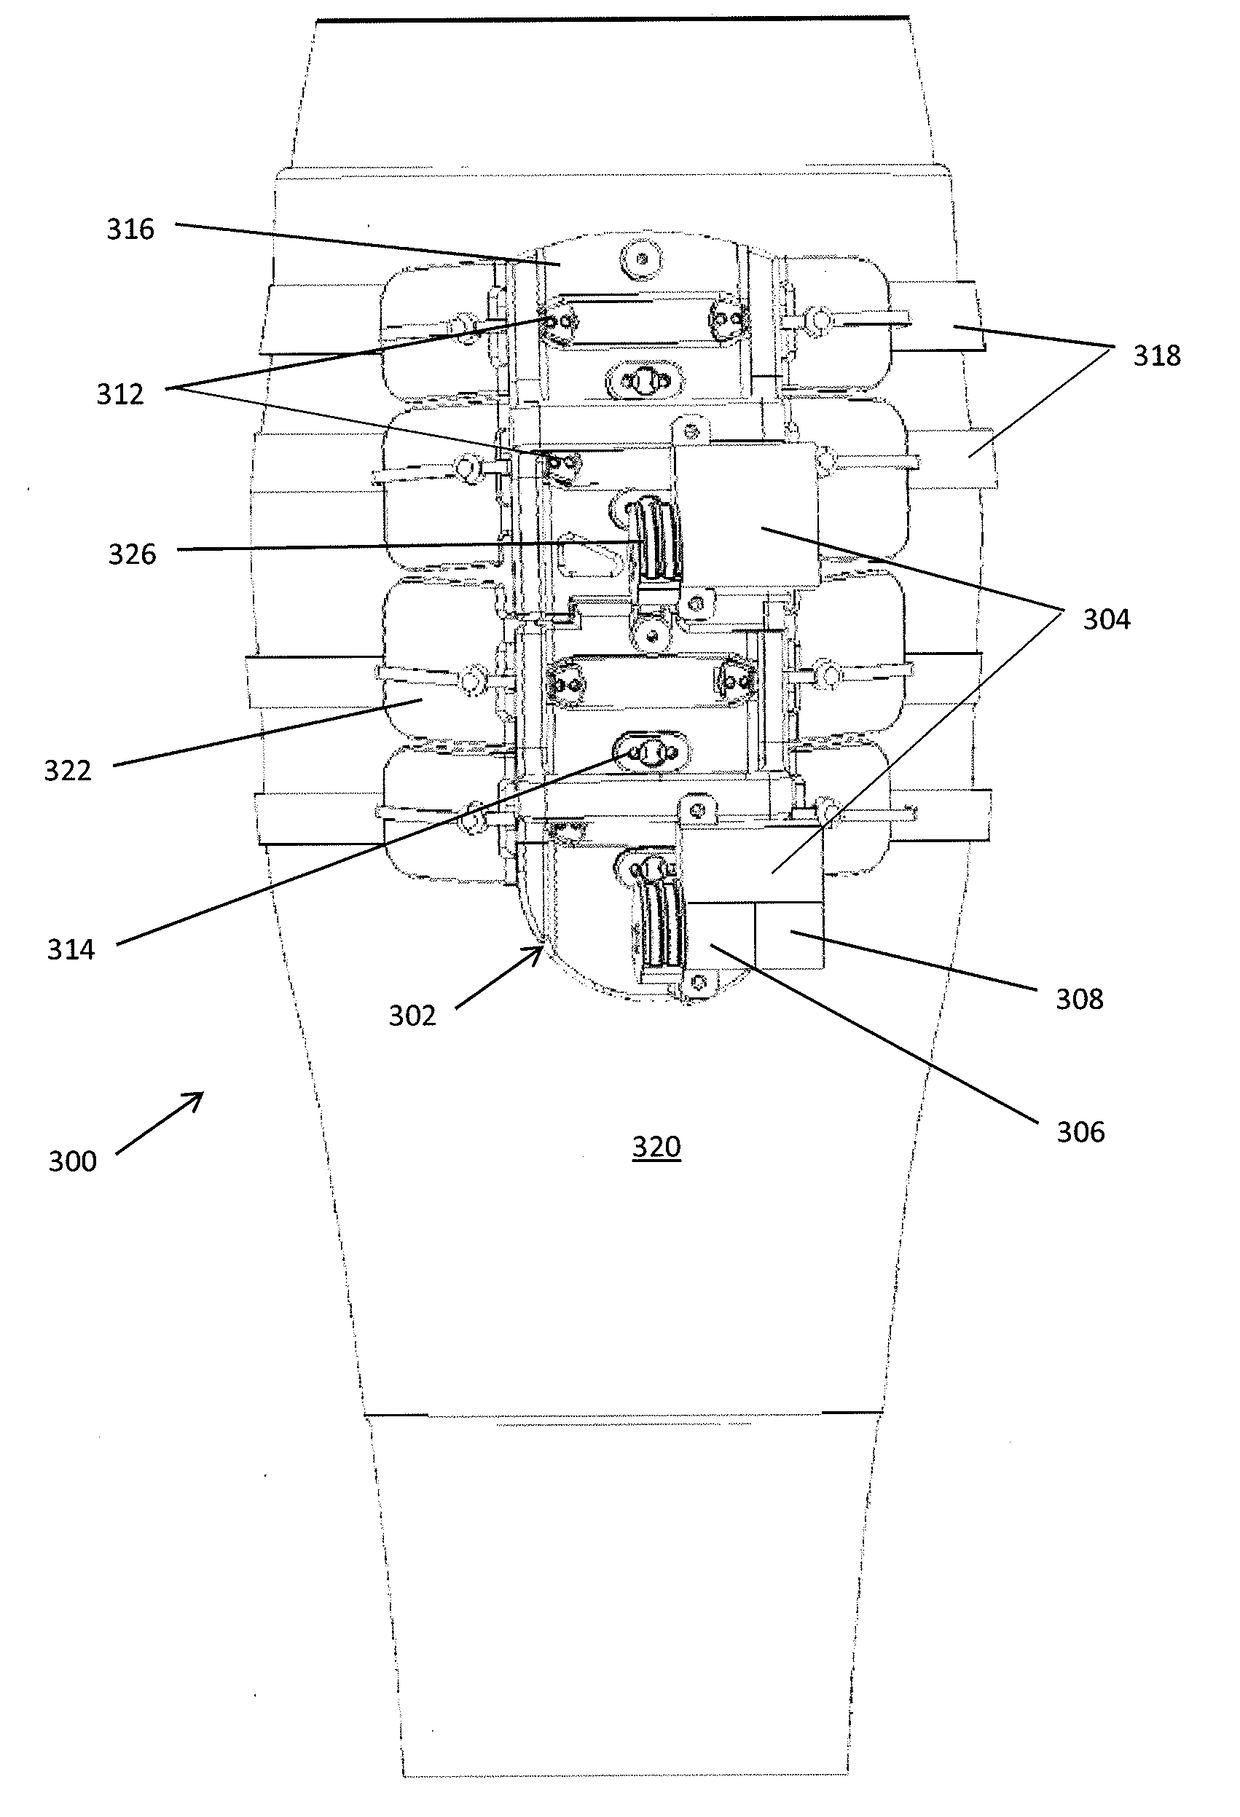 Adaptive compression therapy systems and methods